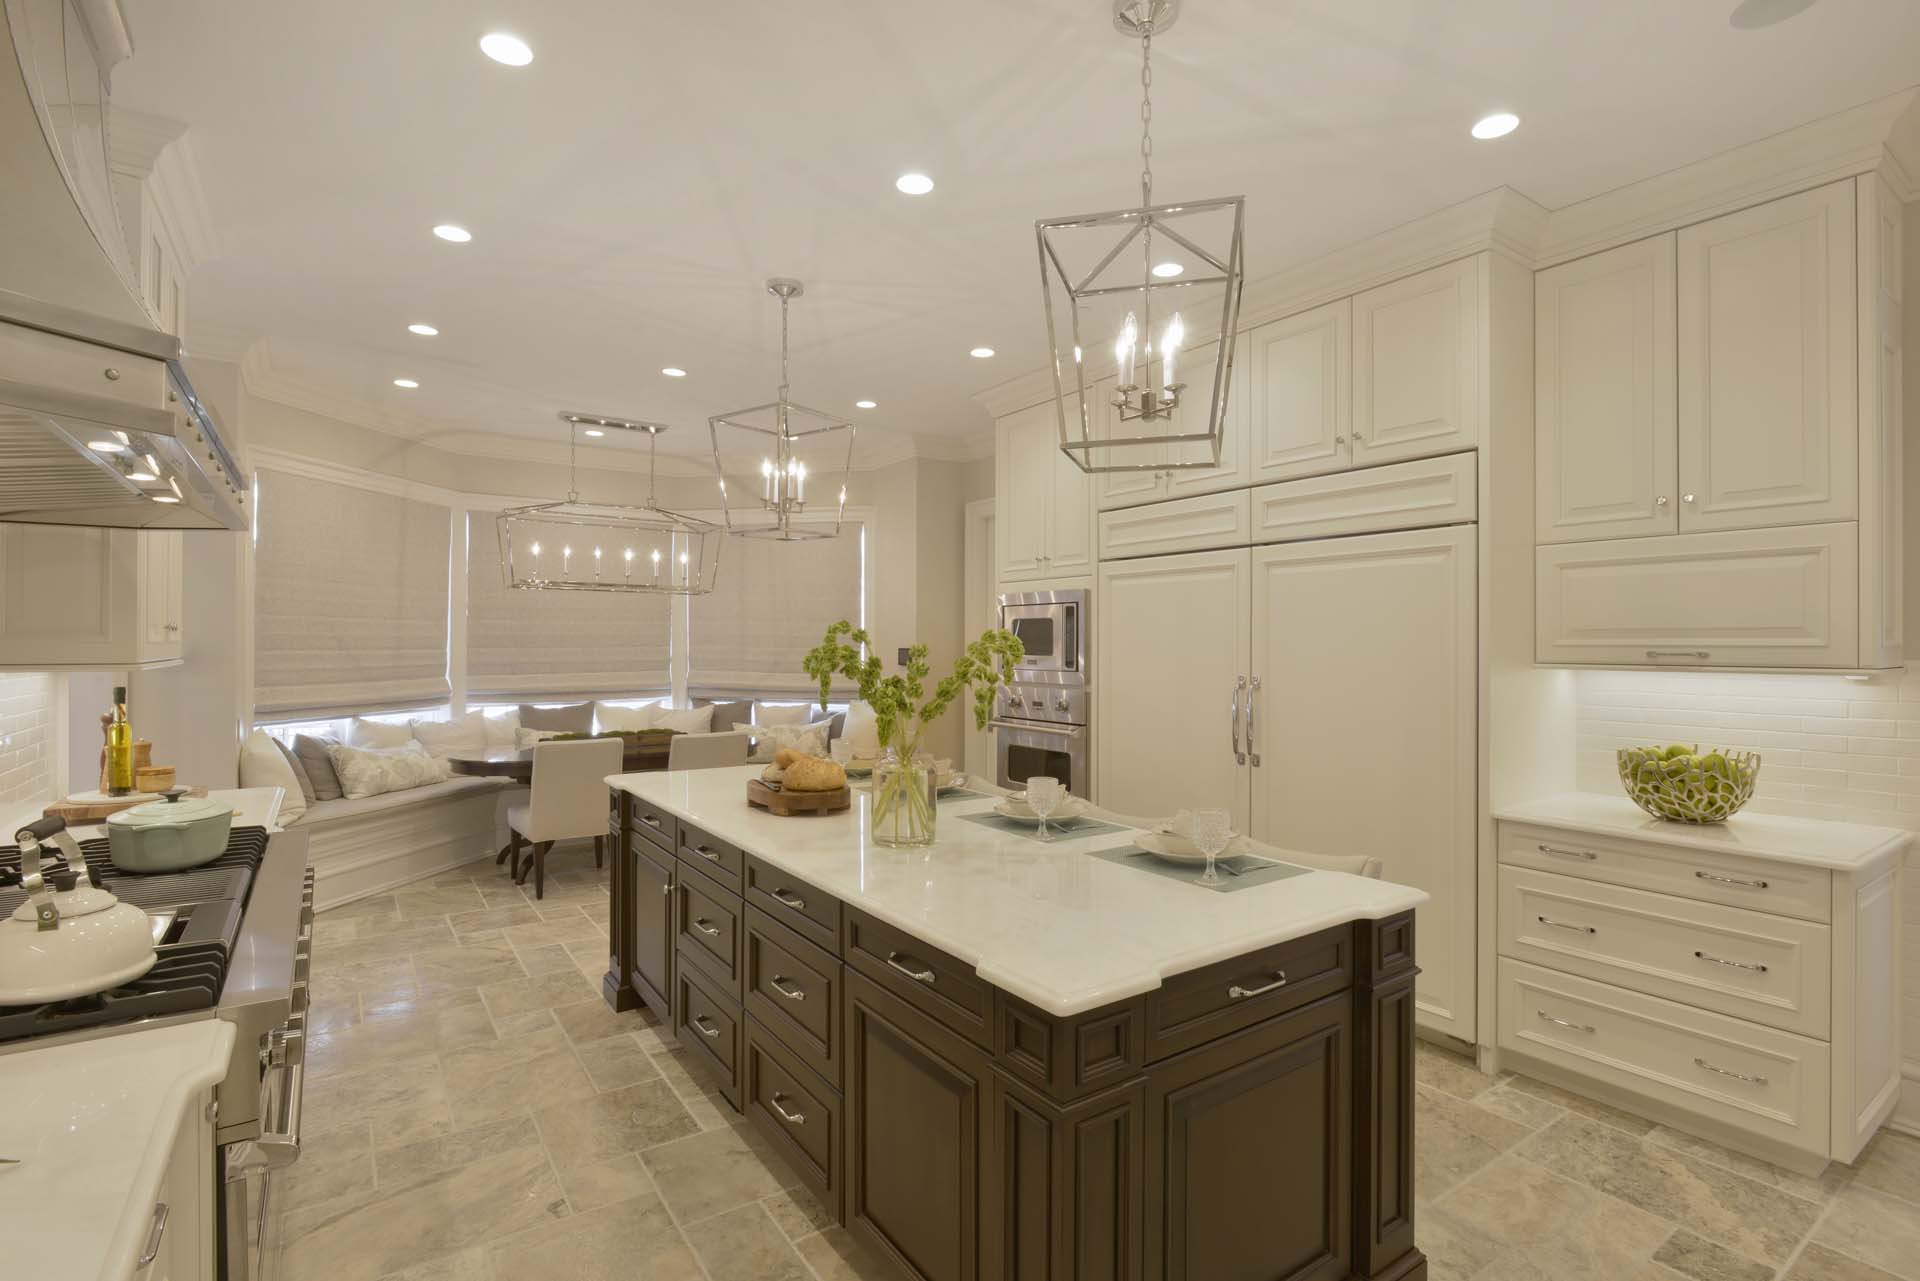 Classic kitchen features white painted Bilotta cabinetry and marble-topped cherry stained island